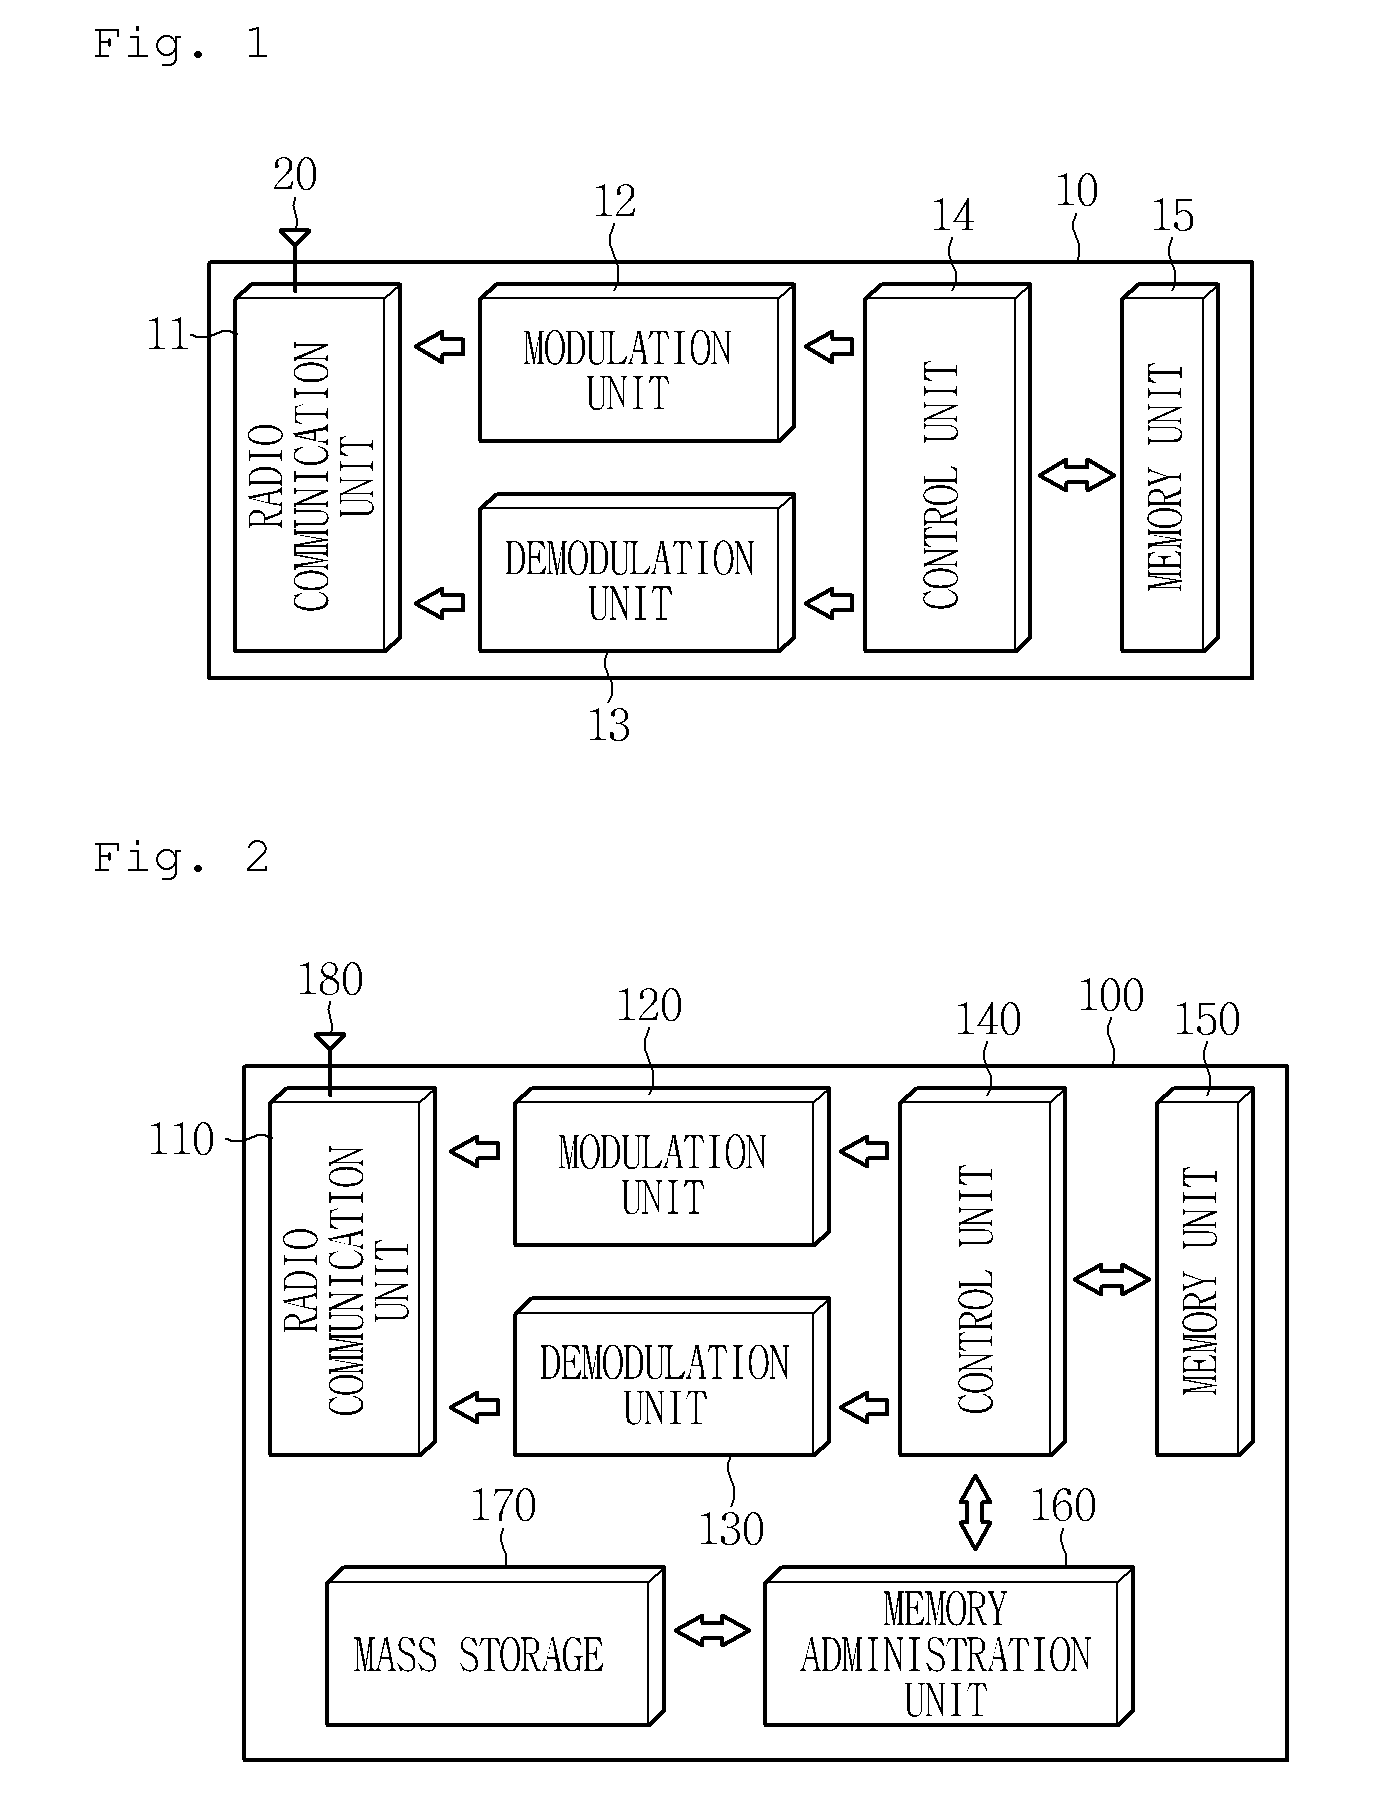 Data streaming apparatus for radio frequency identification tag